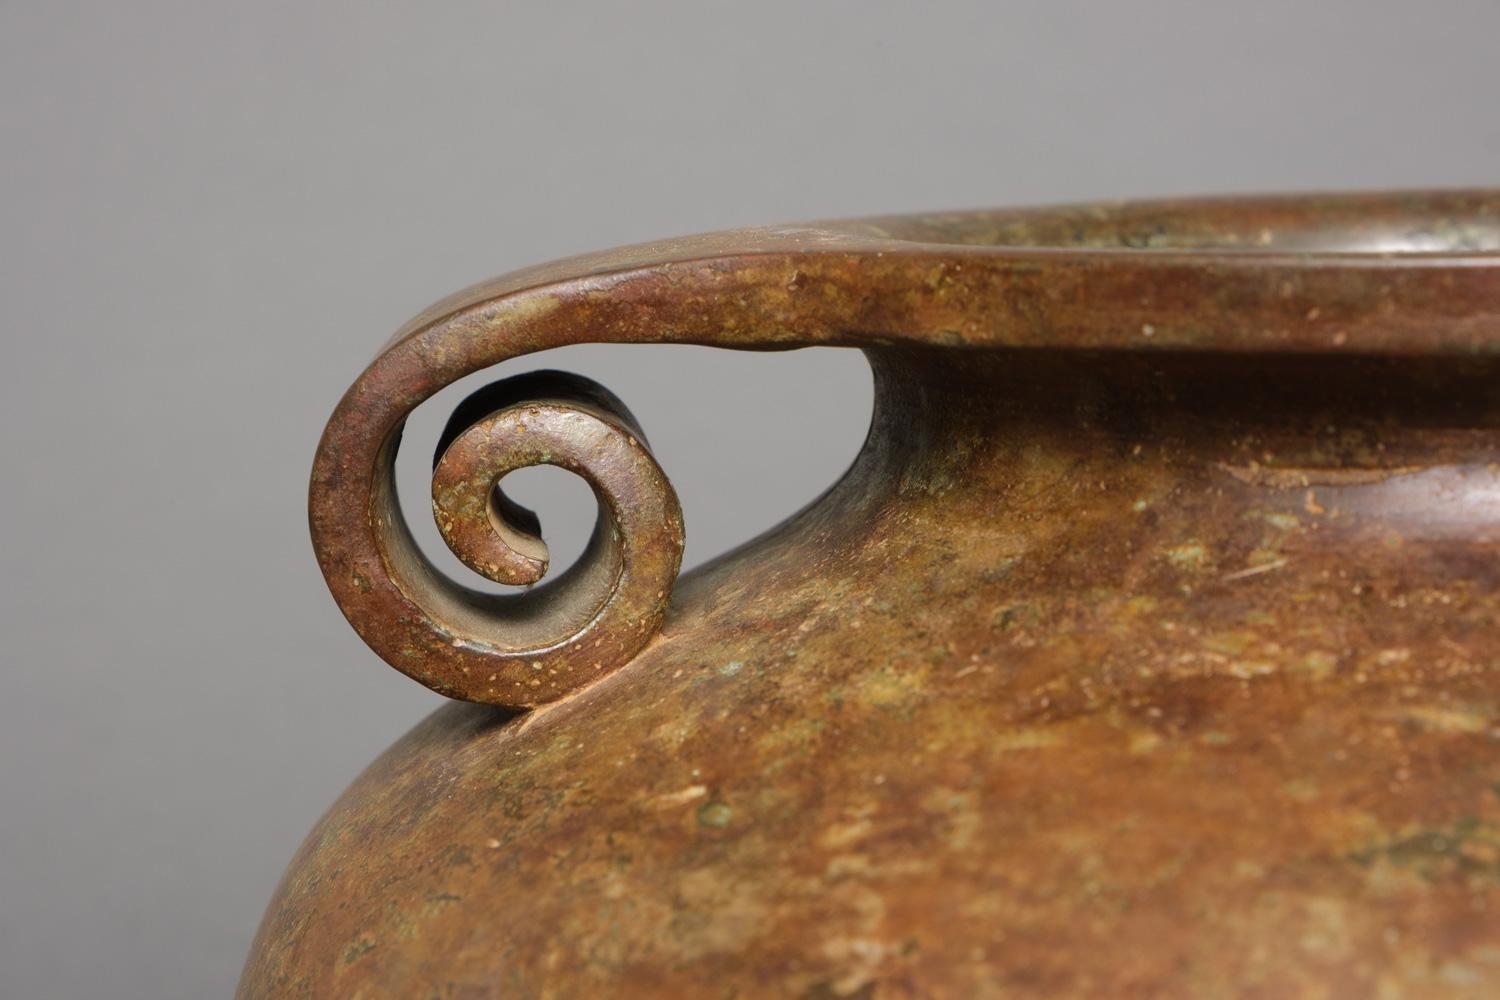 Large and impressive brown patinated bronze urn-shaped vase. The rim is flattened and turns at the sides into a pair of spiralling handles (noshimimi). It has a lovely clouded brown/ochre patina all over its large protruding body.

The vase is